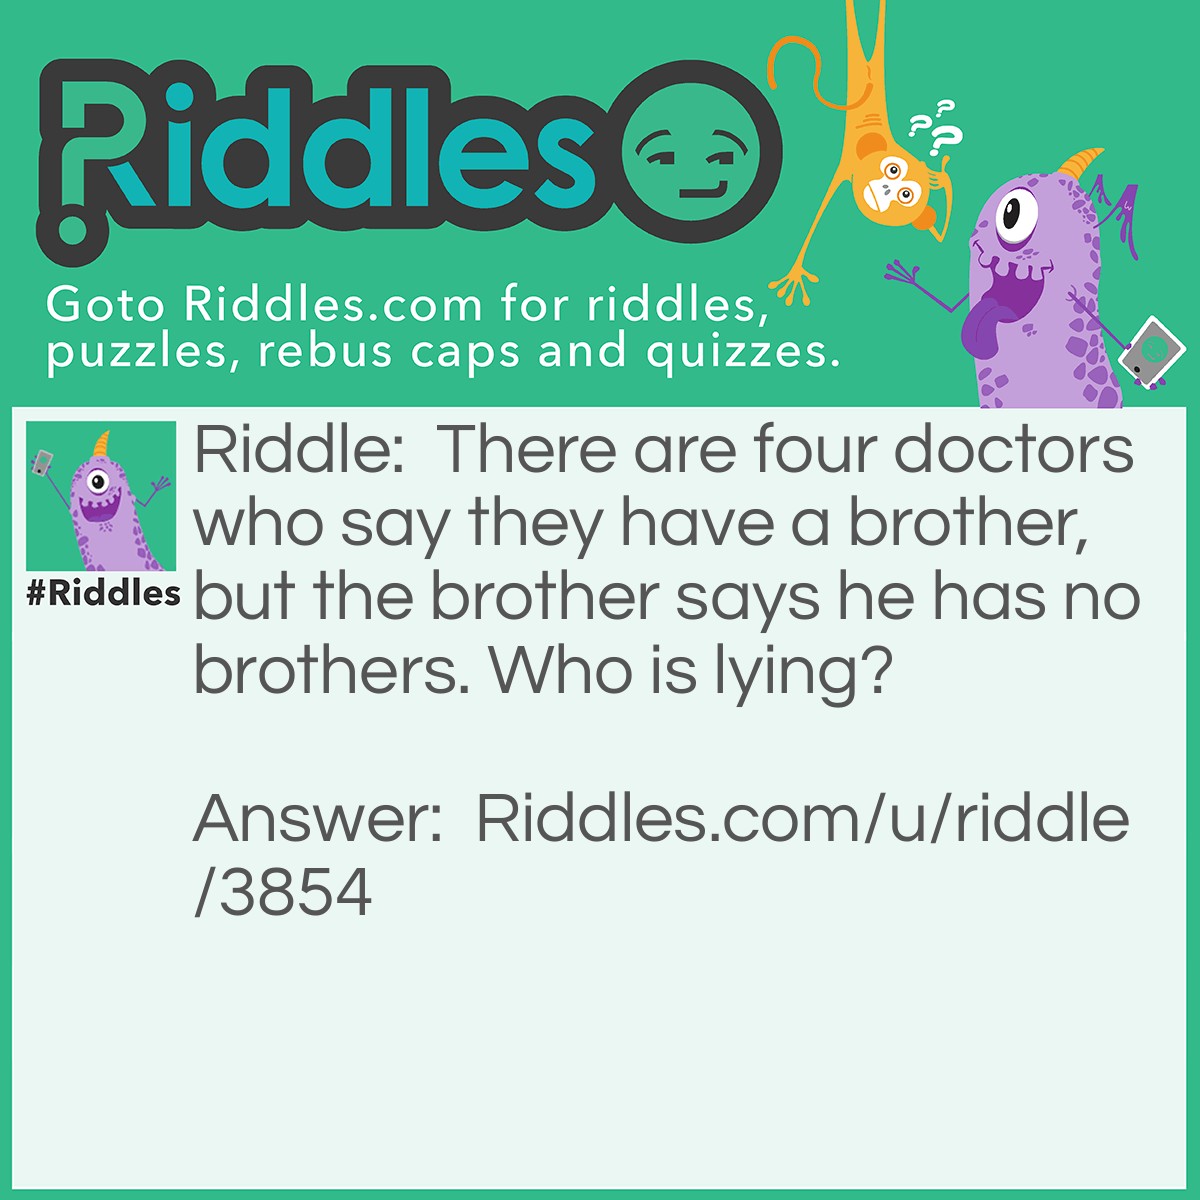 Riddle: There are four doctors who say they have a brother, but the brother says he has no brothers. Who is lying? Answer: Neither, the doctors are his sisters!